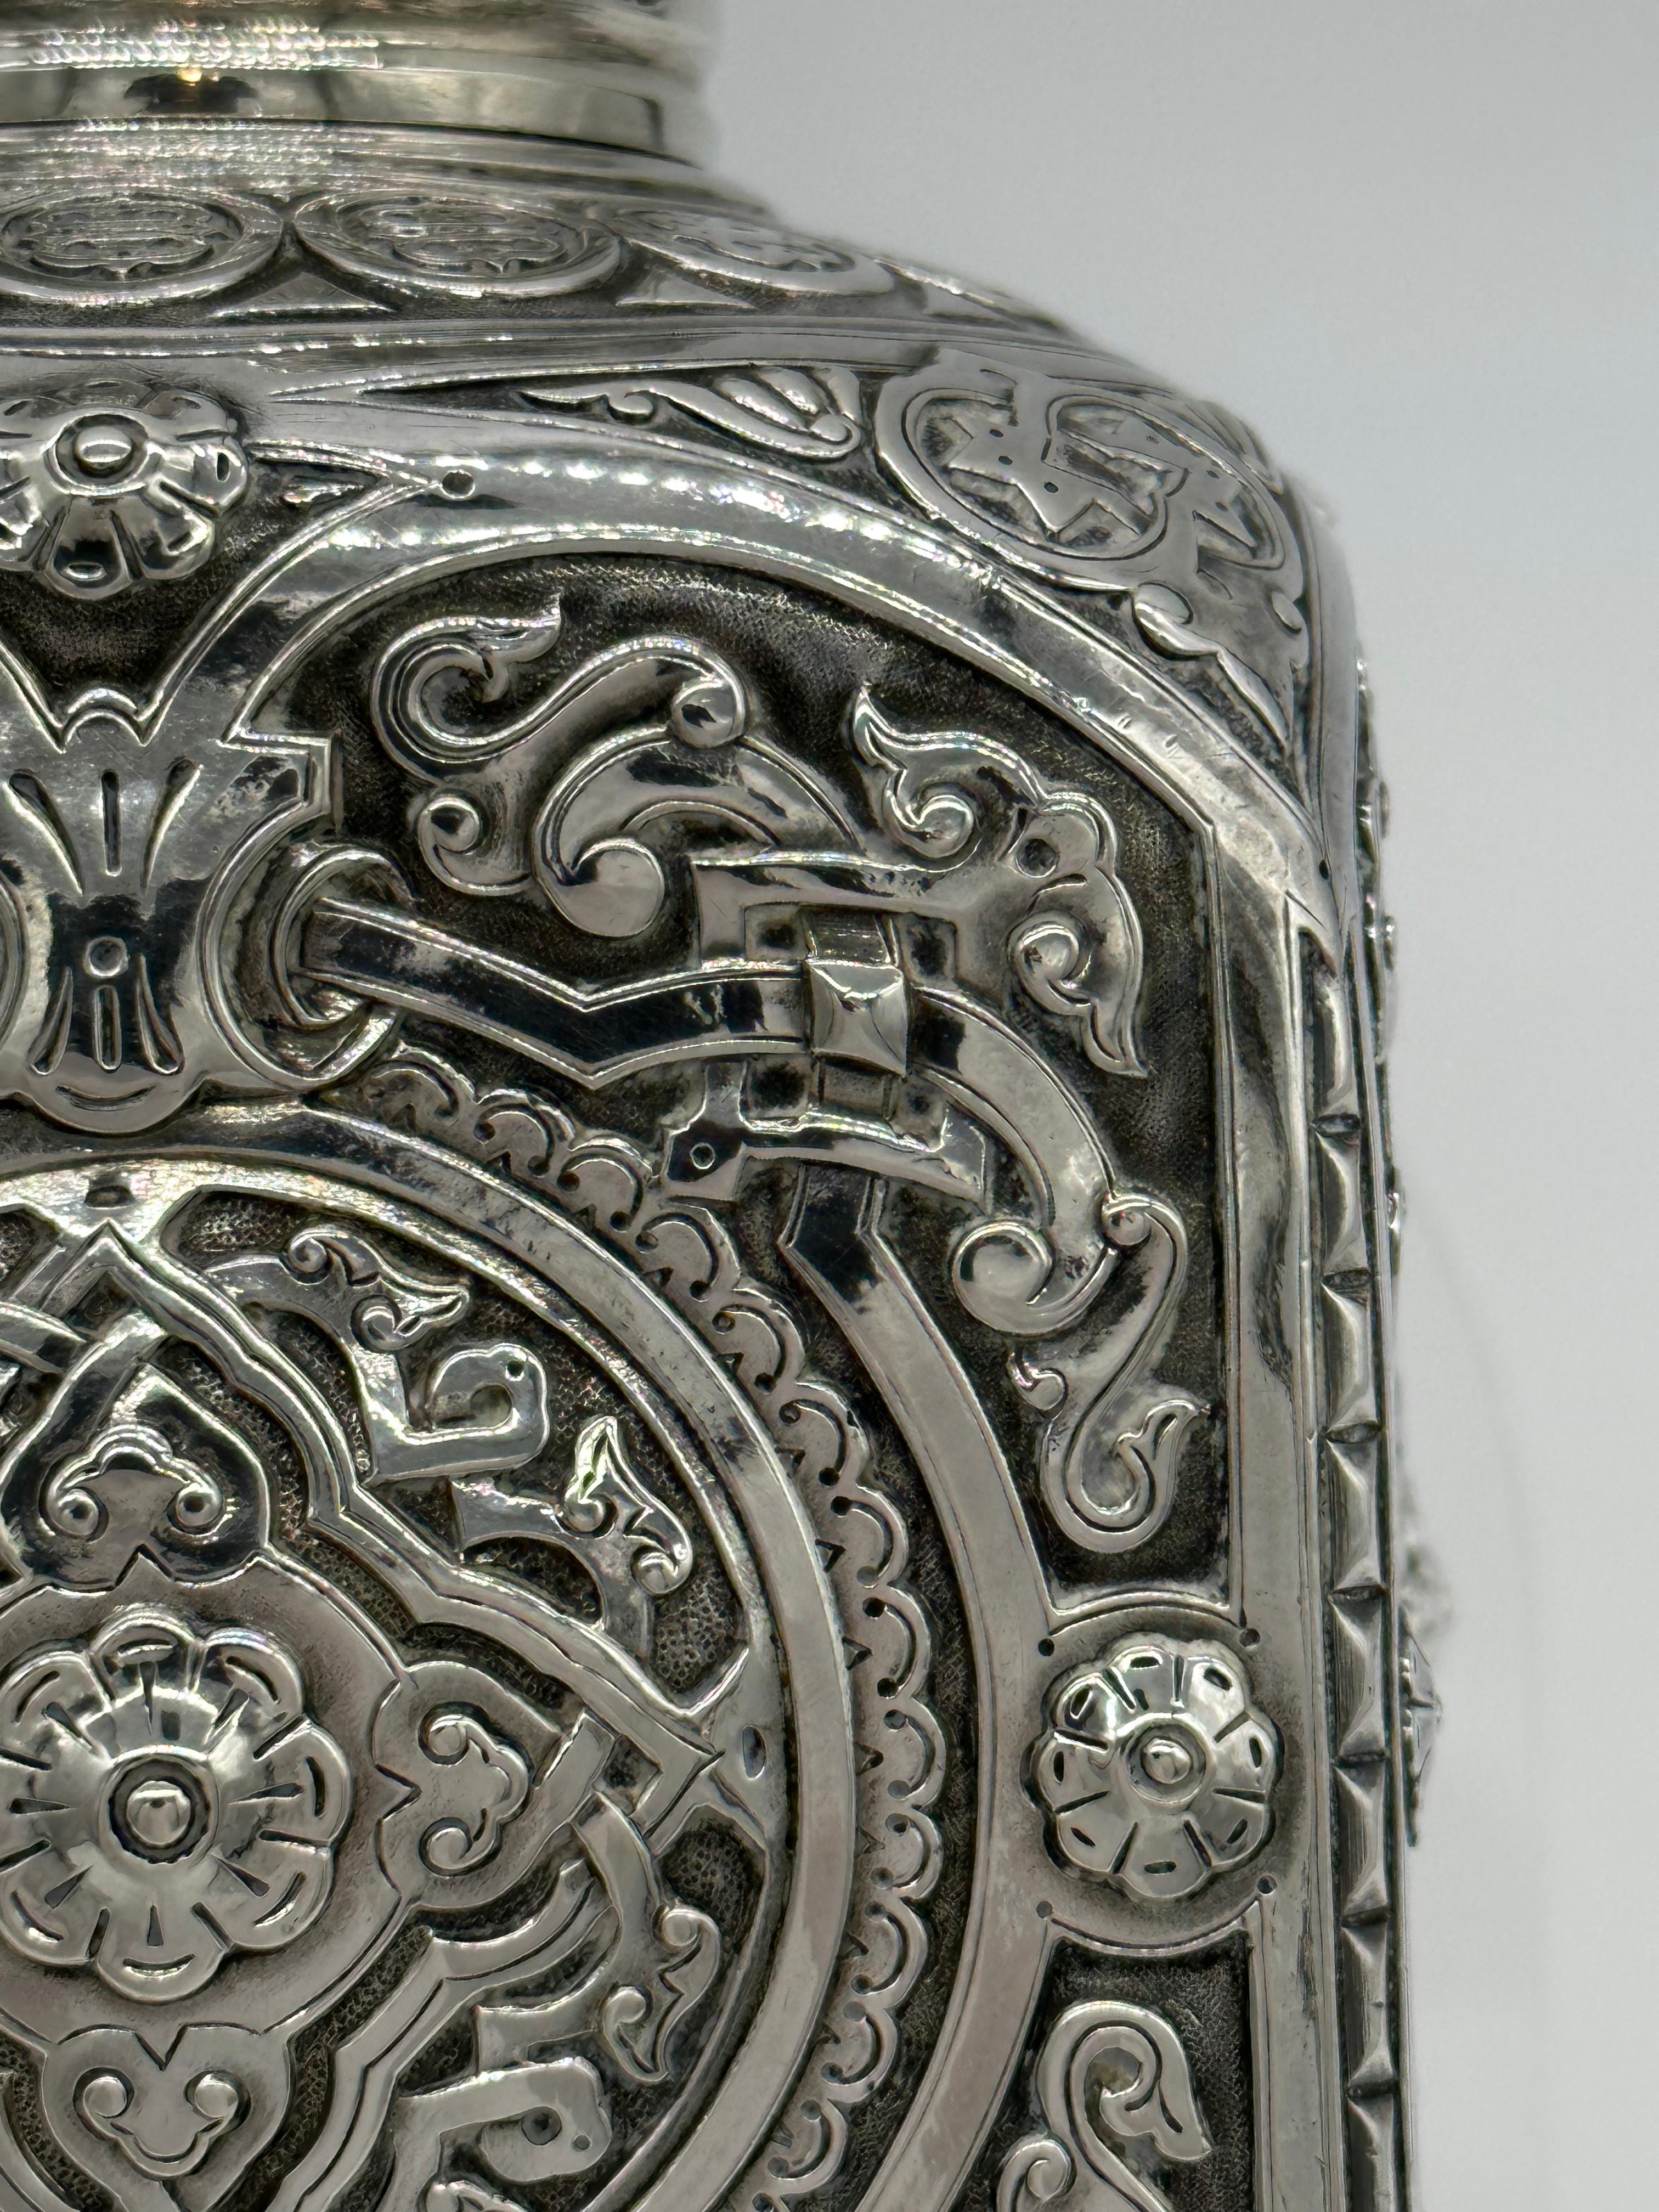 Amazing Antique Russian Imperial Silver Tea Caddy, Loskutov, Moscow 1889 6